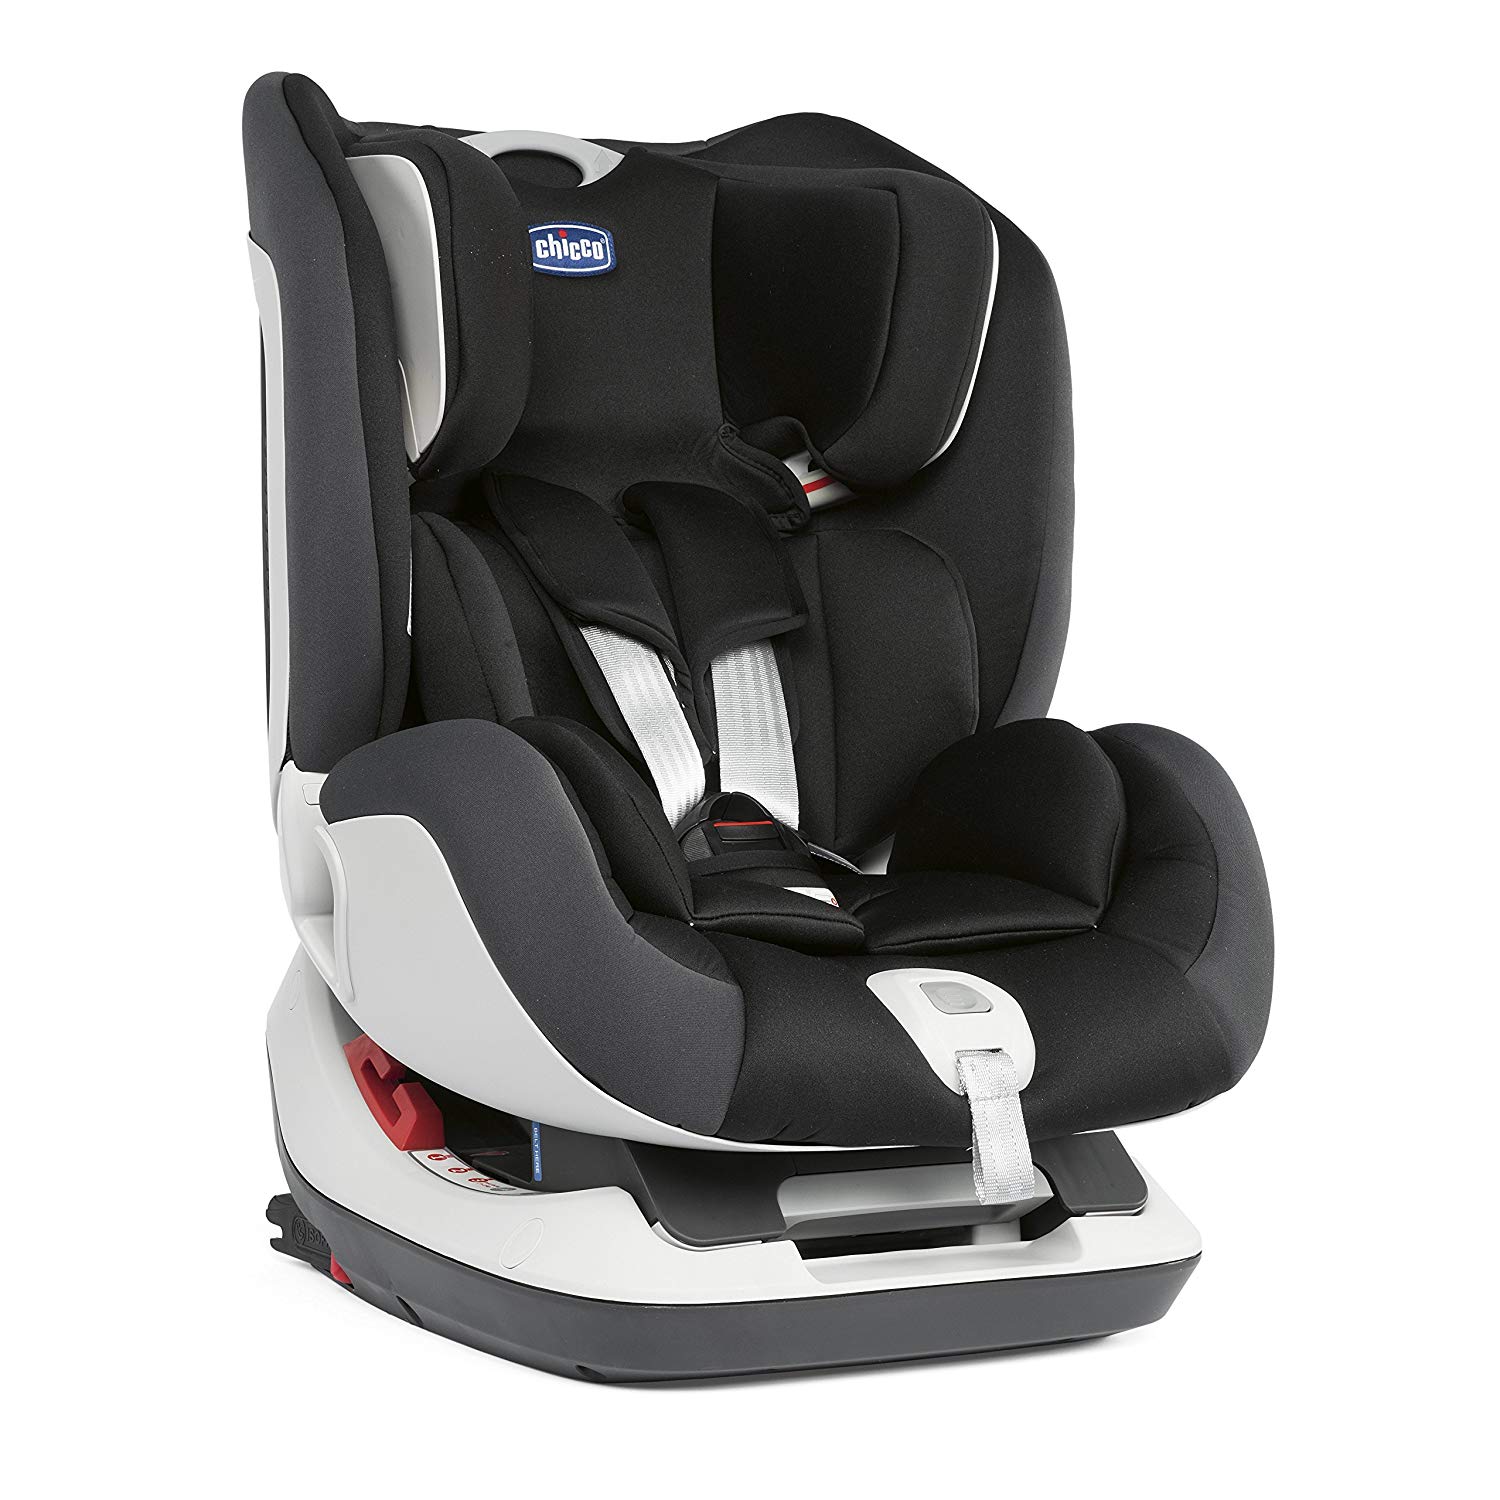 Chicco 08079828510000 012 Seat Up Child Car Seat Size 0/1/2, Black